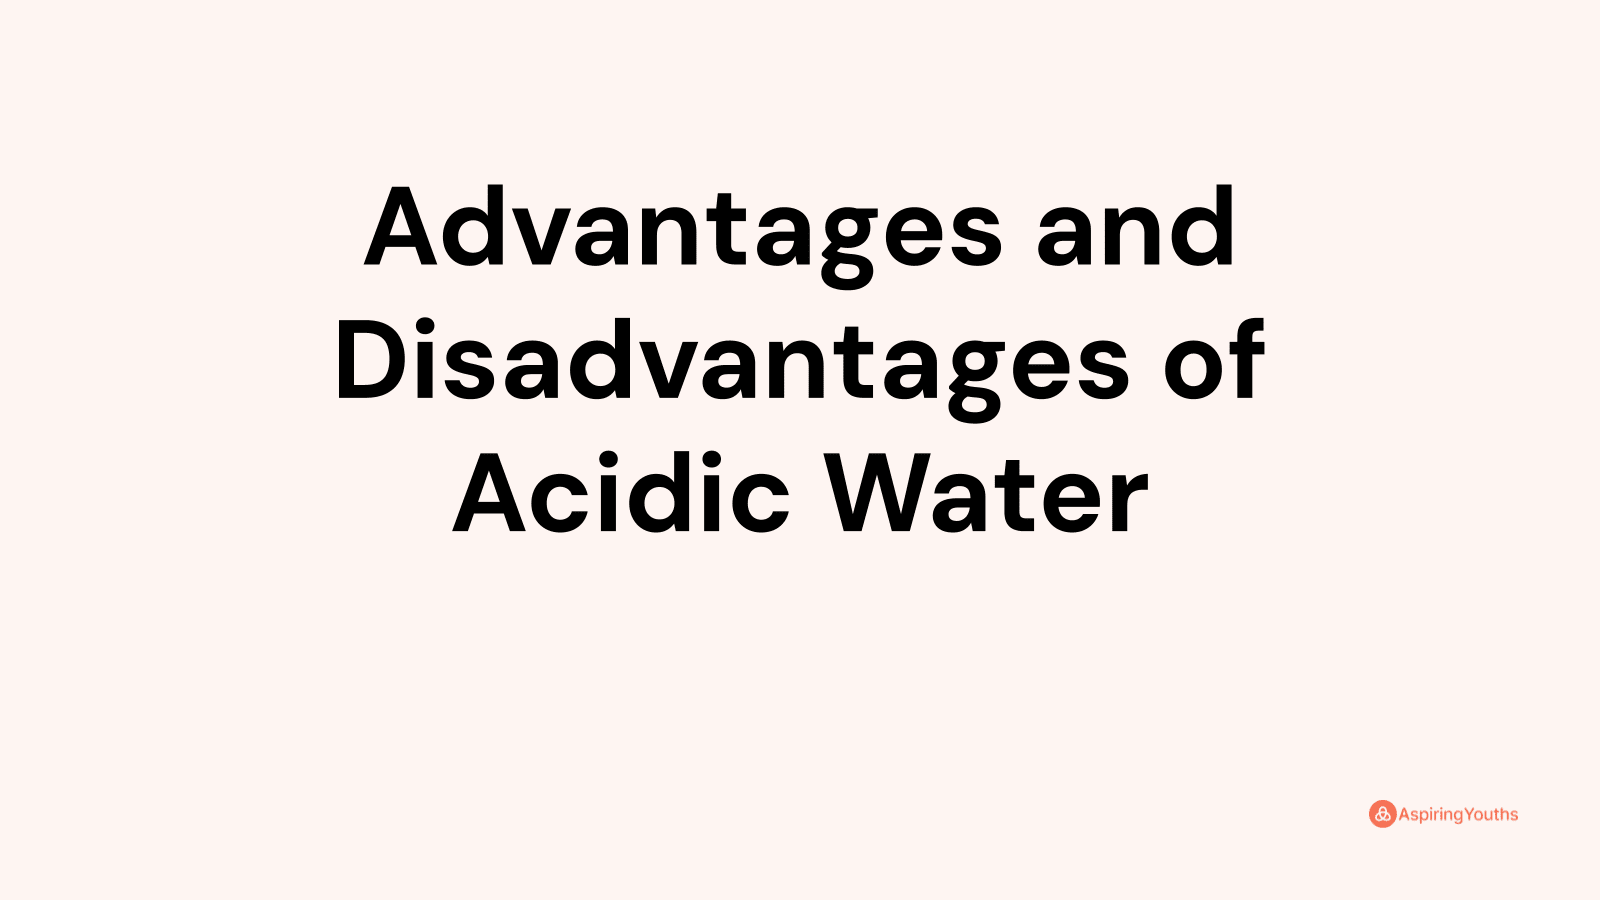 Advantages and disadvantages of Acidic Water